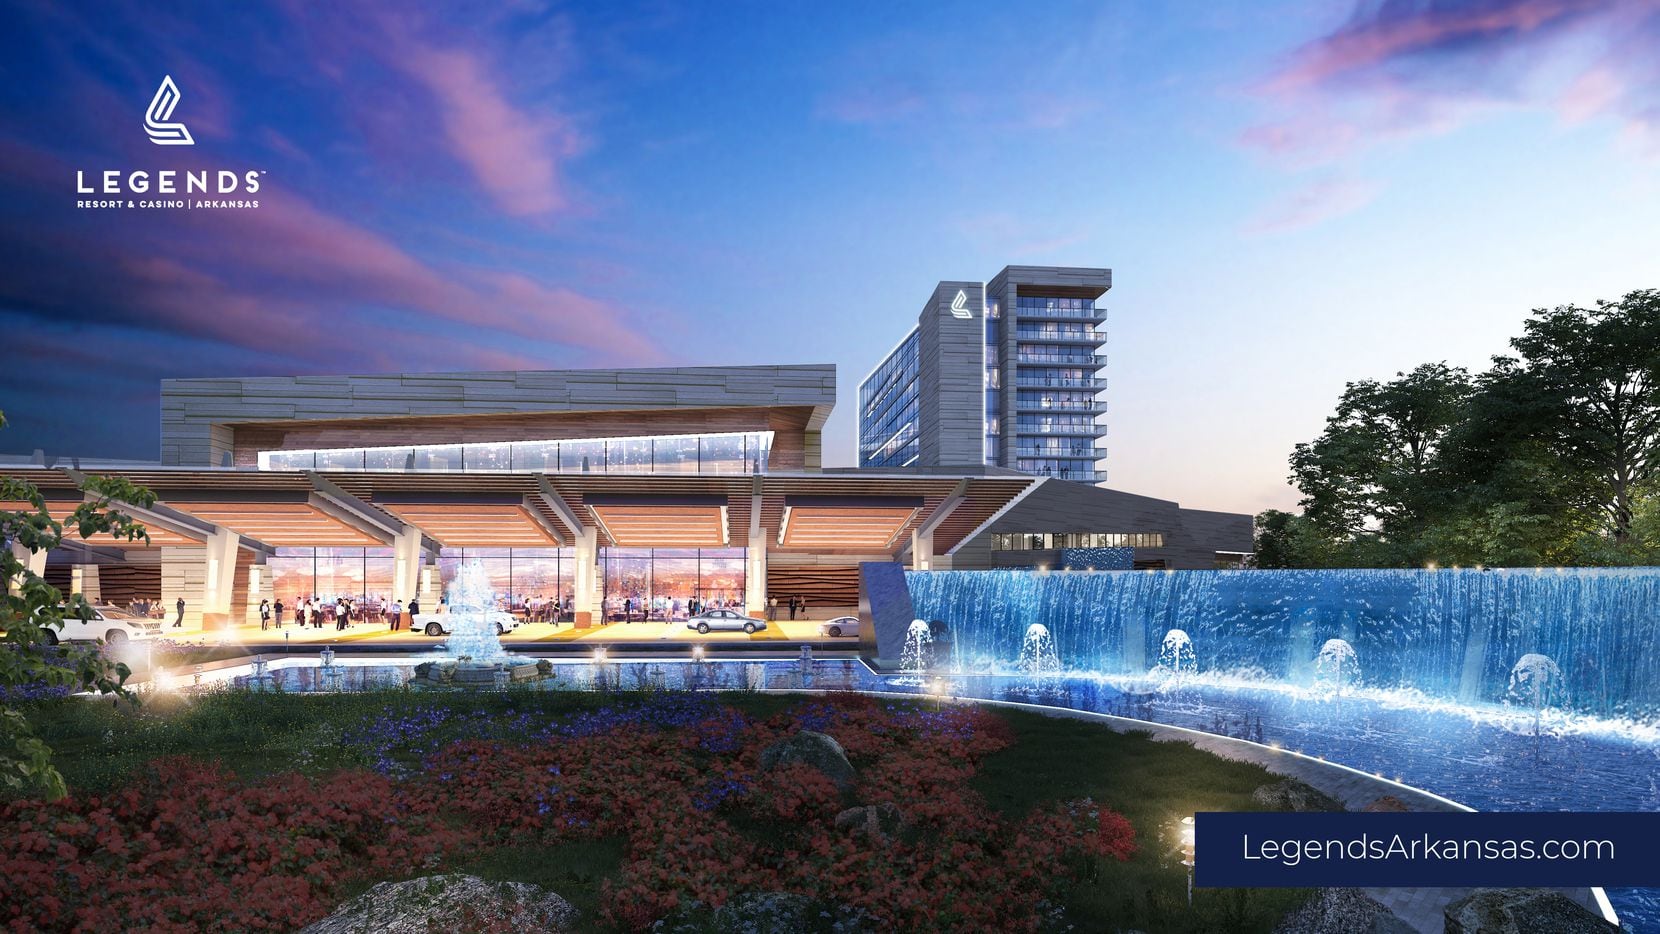 The Legends Resort & Casino Arkansas will be one of the first full-service casinos in the...